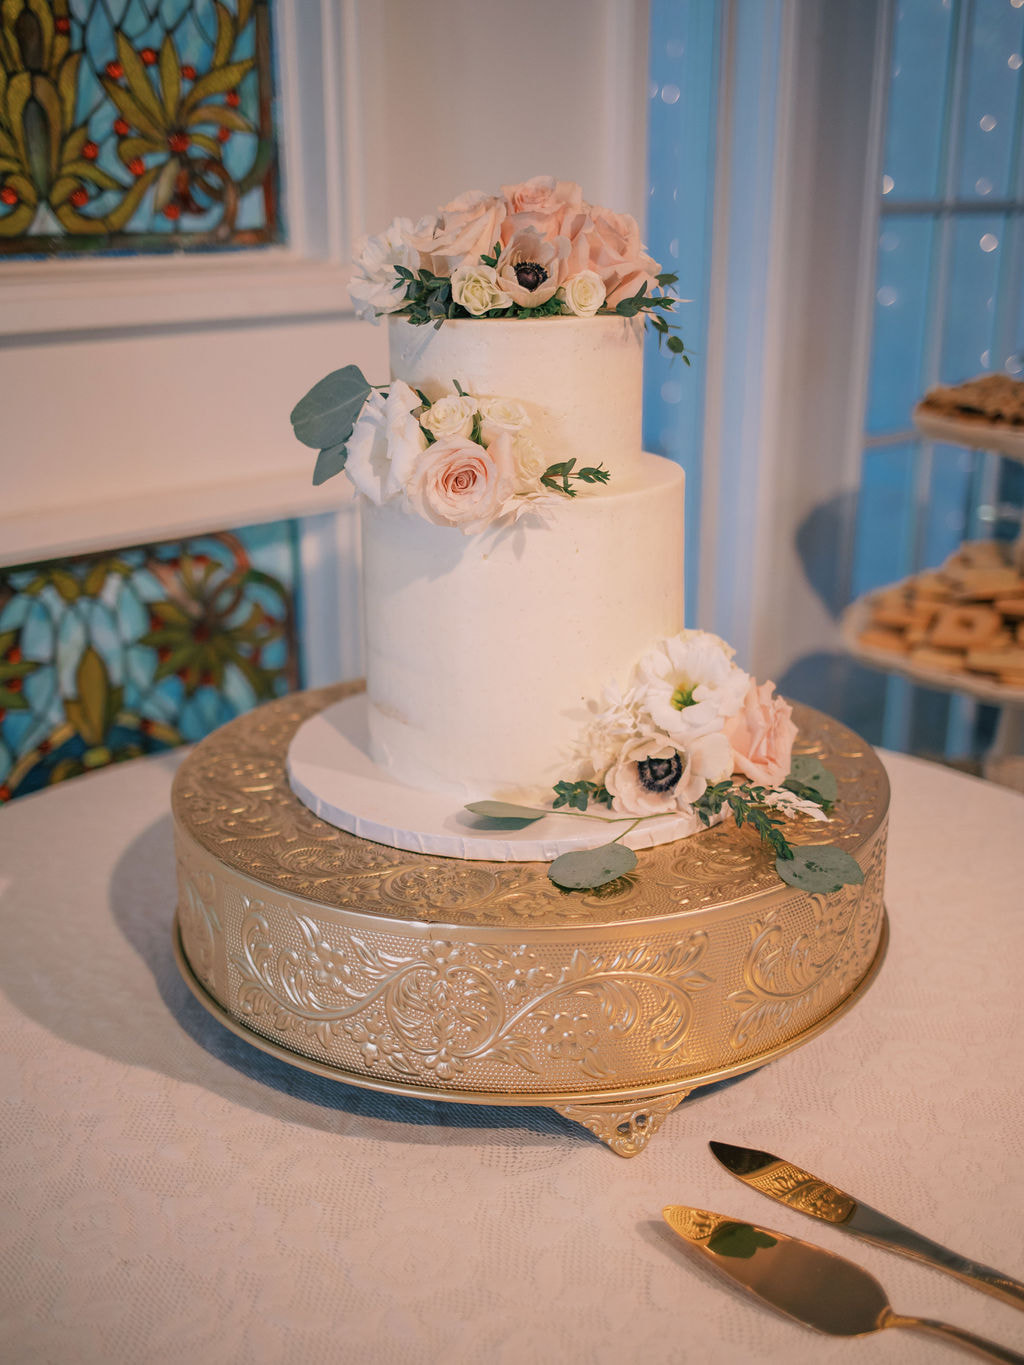 two-tier wedding cake on gold embossed stand